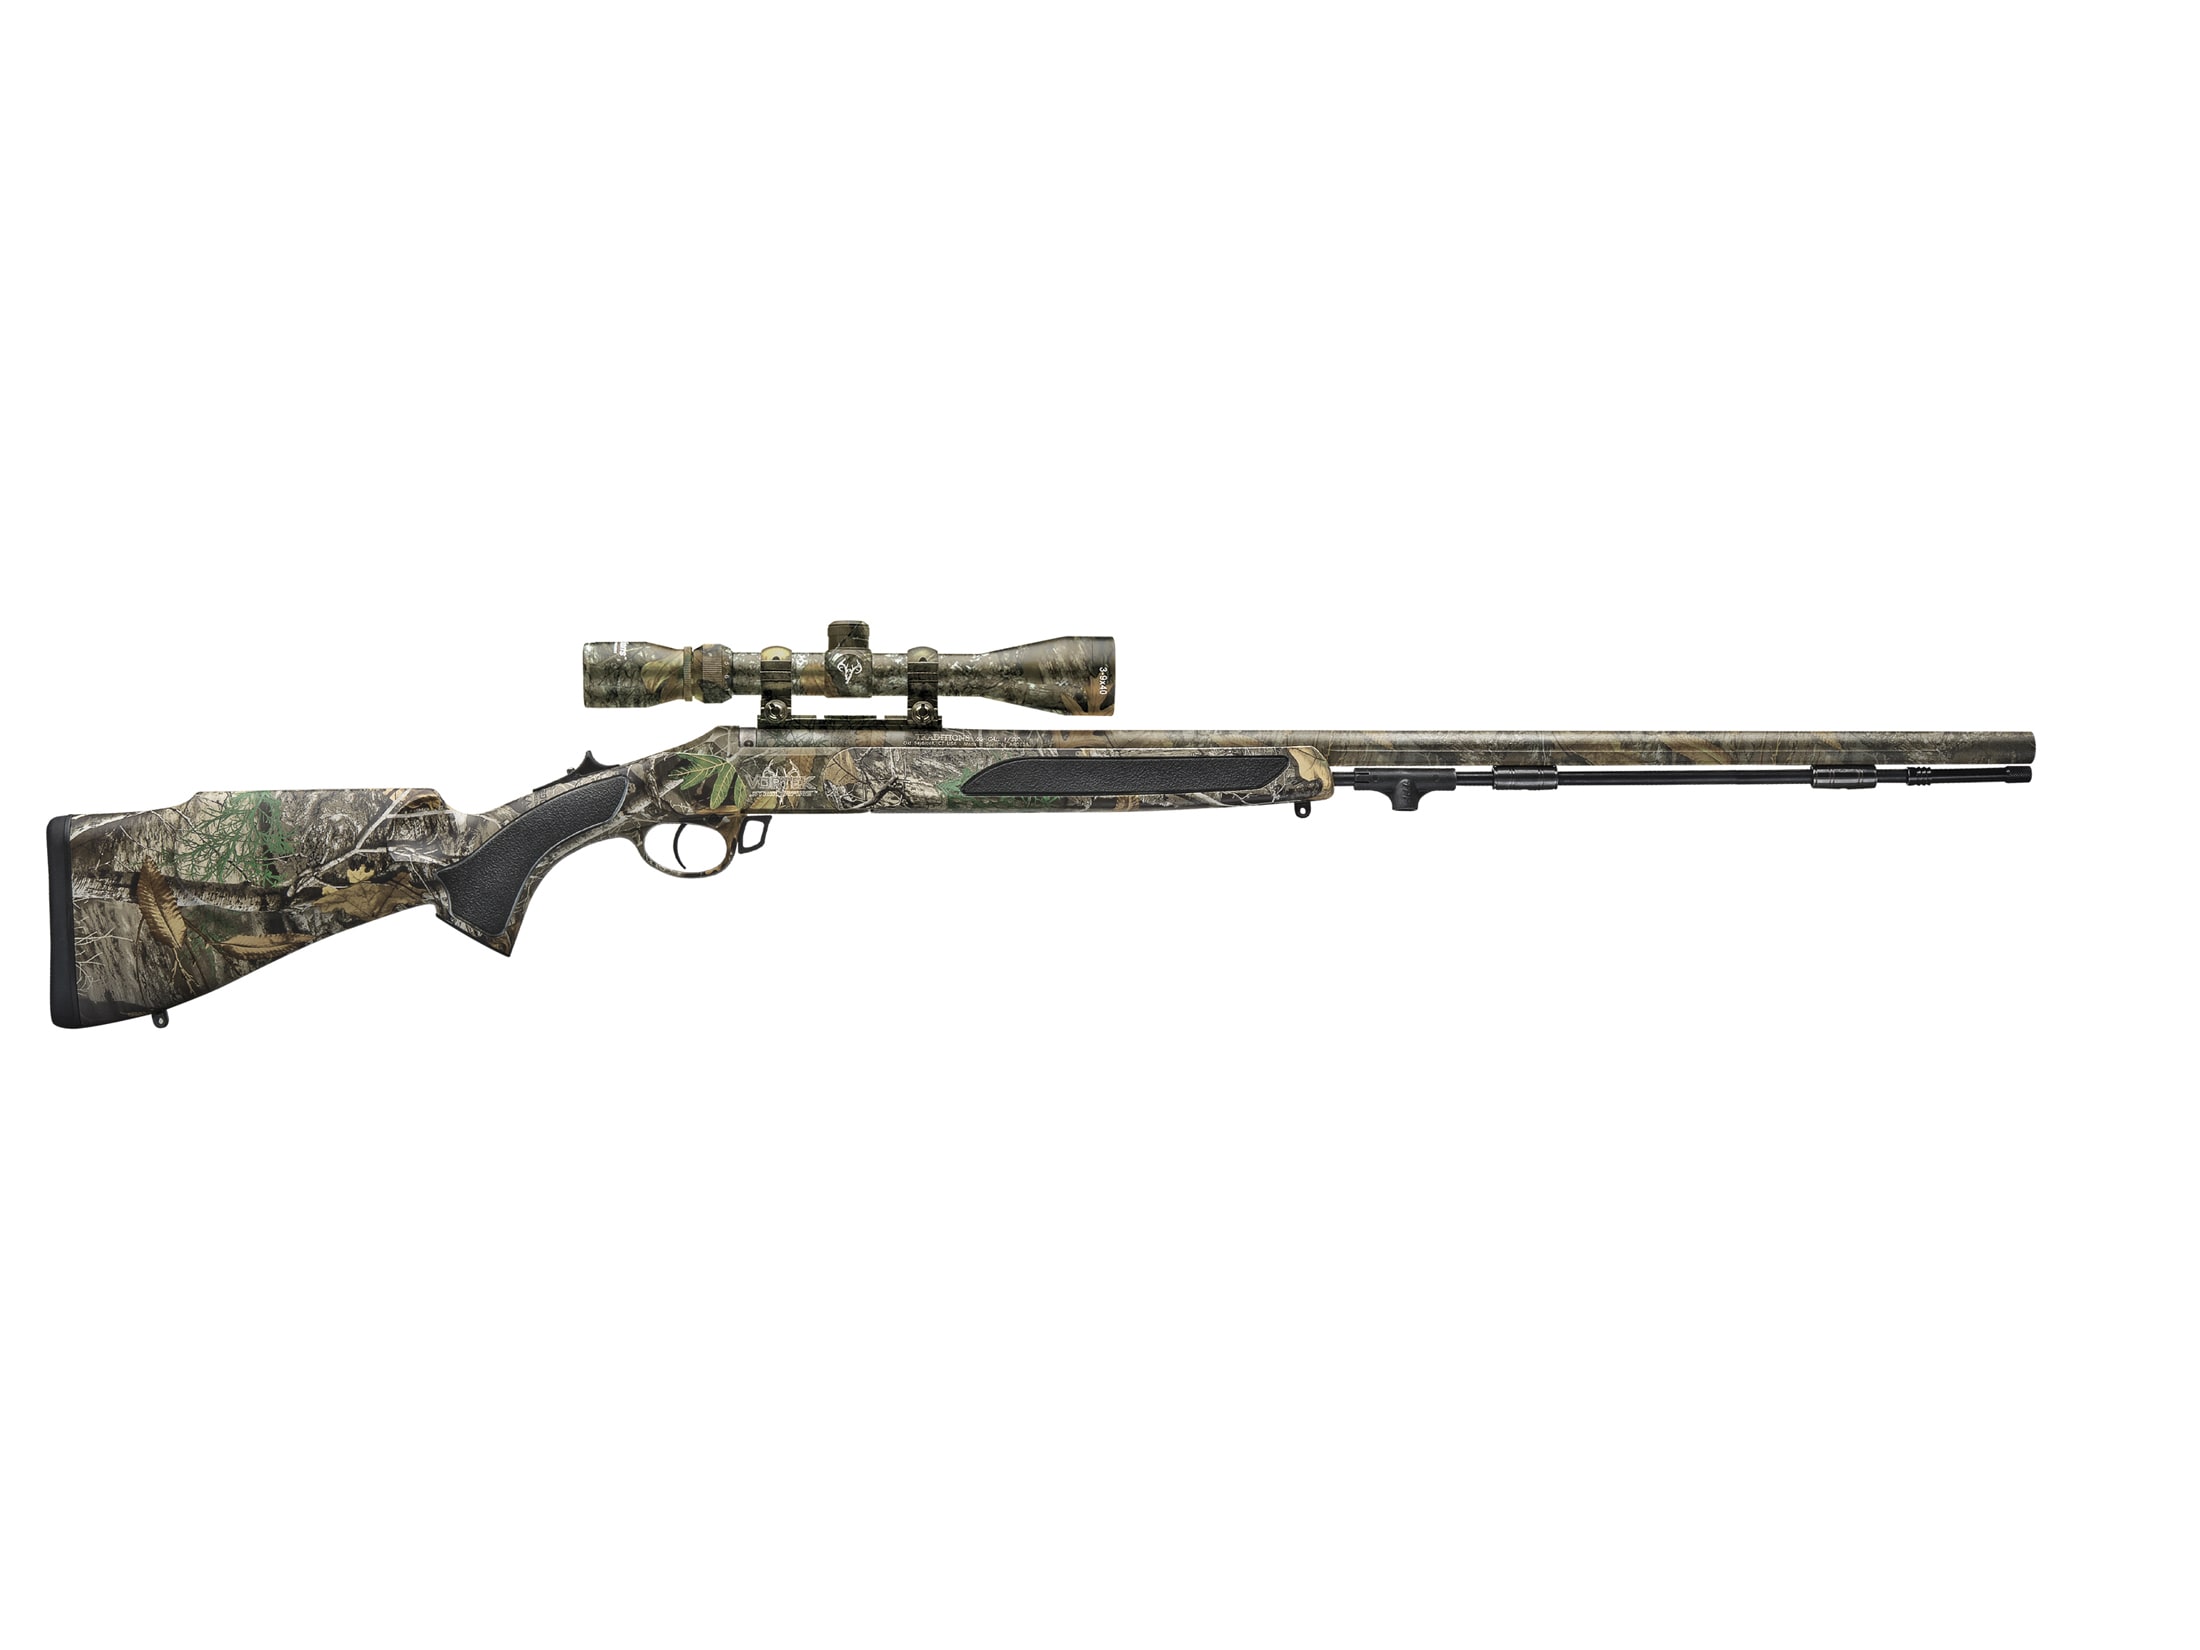 Image of Traditions Vortek StrikerFire LDR Muzzleloading Rifle 50 Caliber 30" Barrel with 3-9x40 Rangefinding Scope Synthetic Stock Realtree Edge